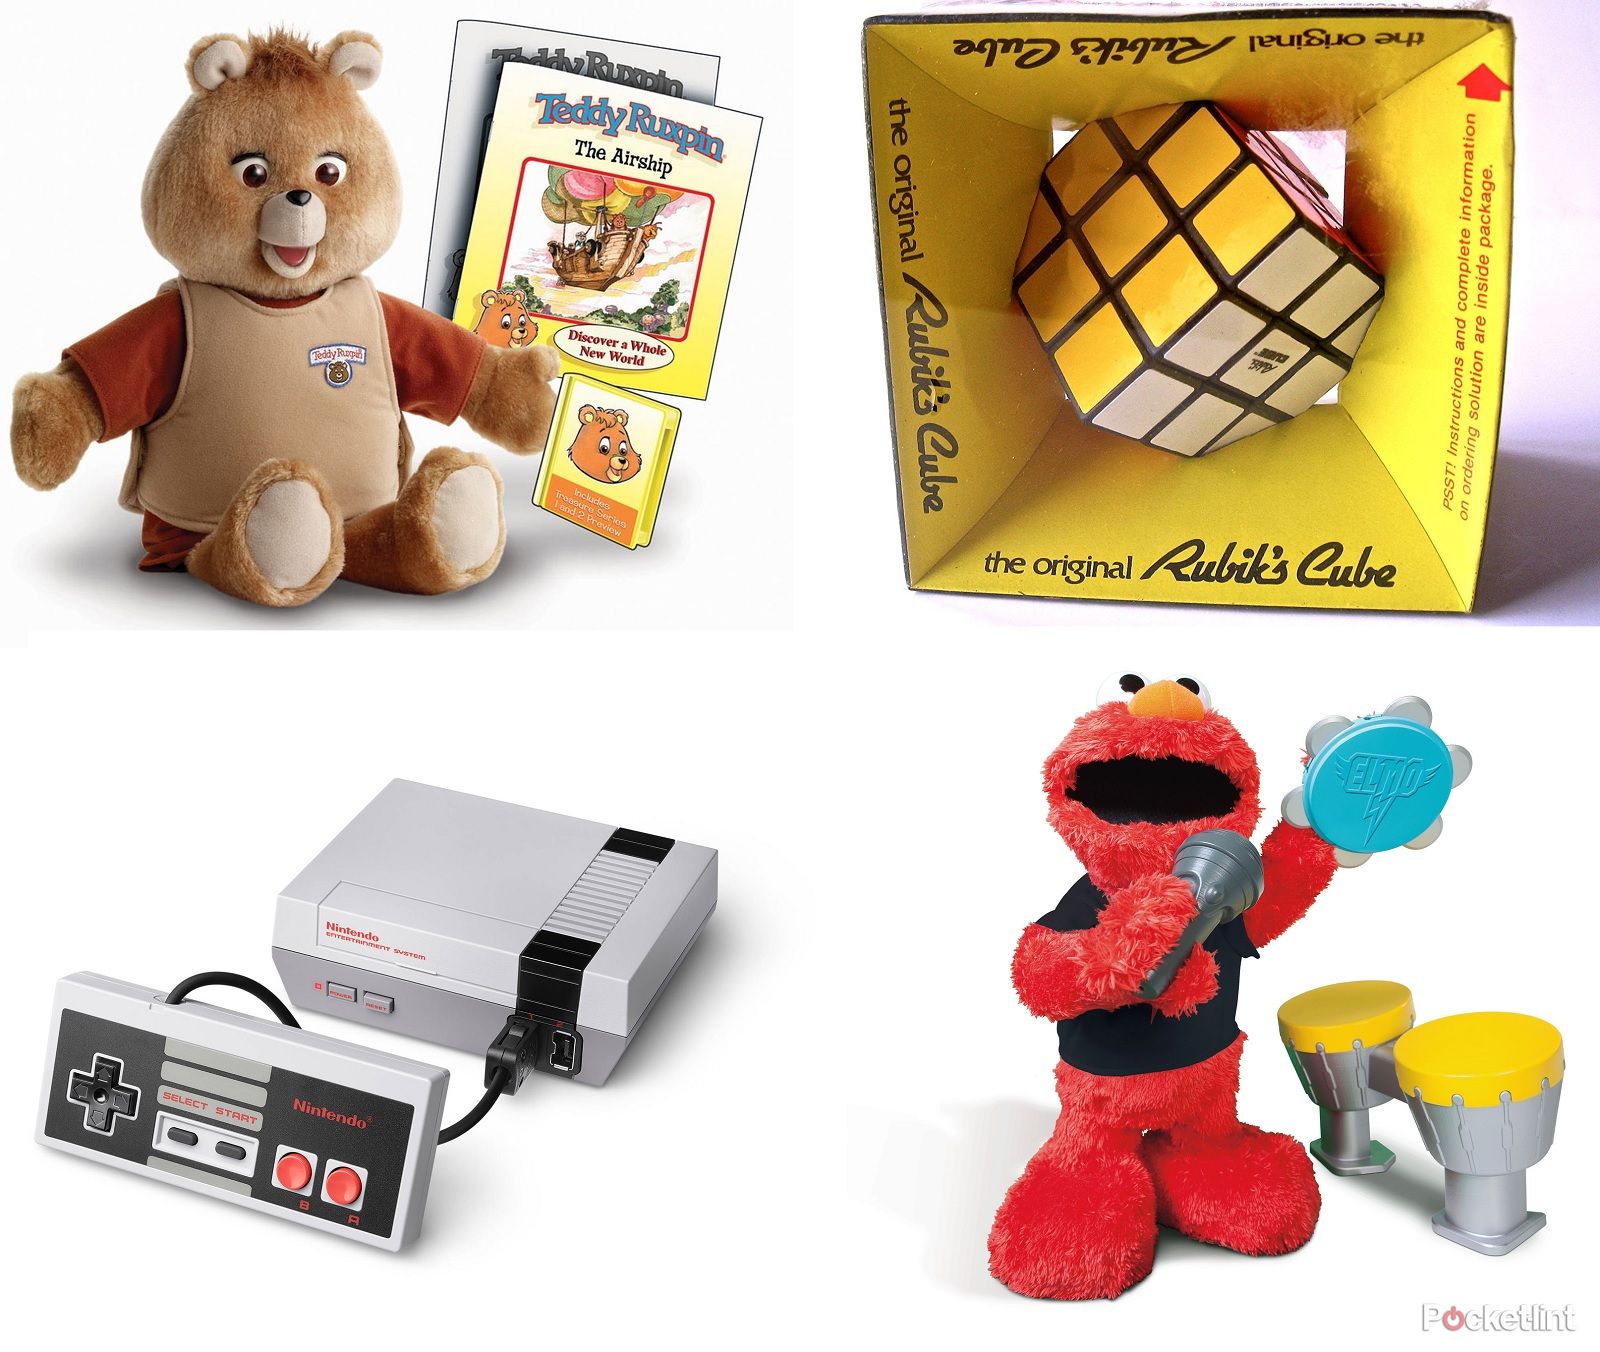 The most popular Christmas toys and tech from the last few decades